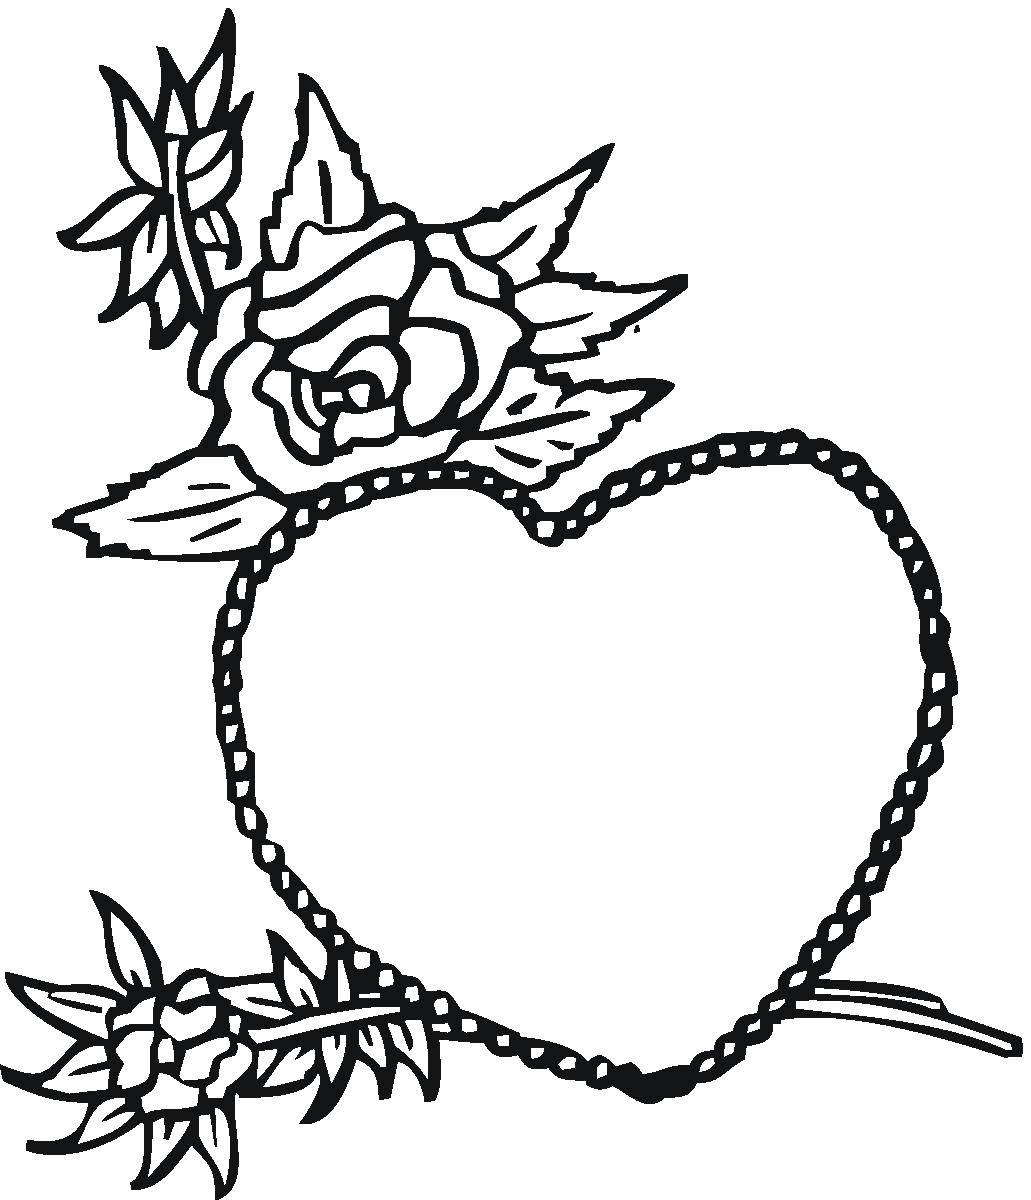 Coloring Heart and roses. Category Hearts. Tags:  form, heart, love, roses.